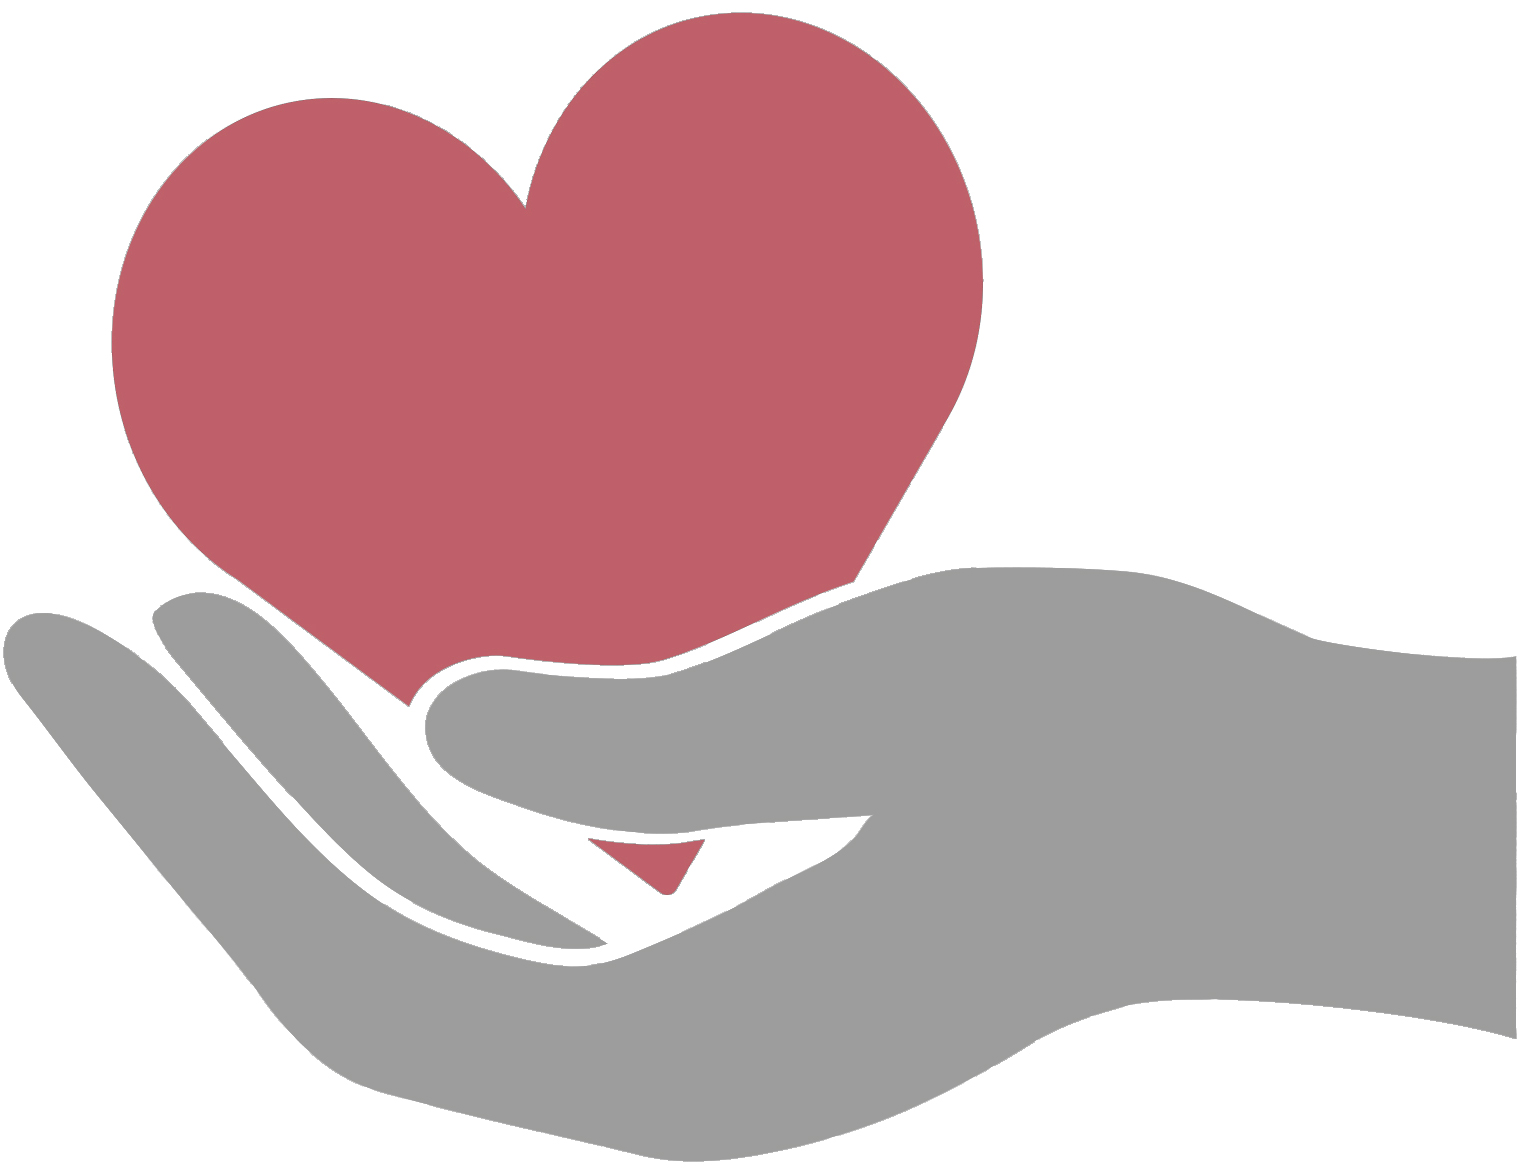 Donation hand with heart icon